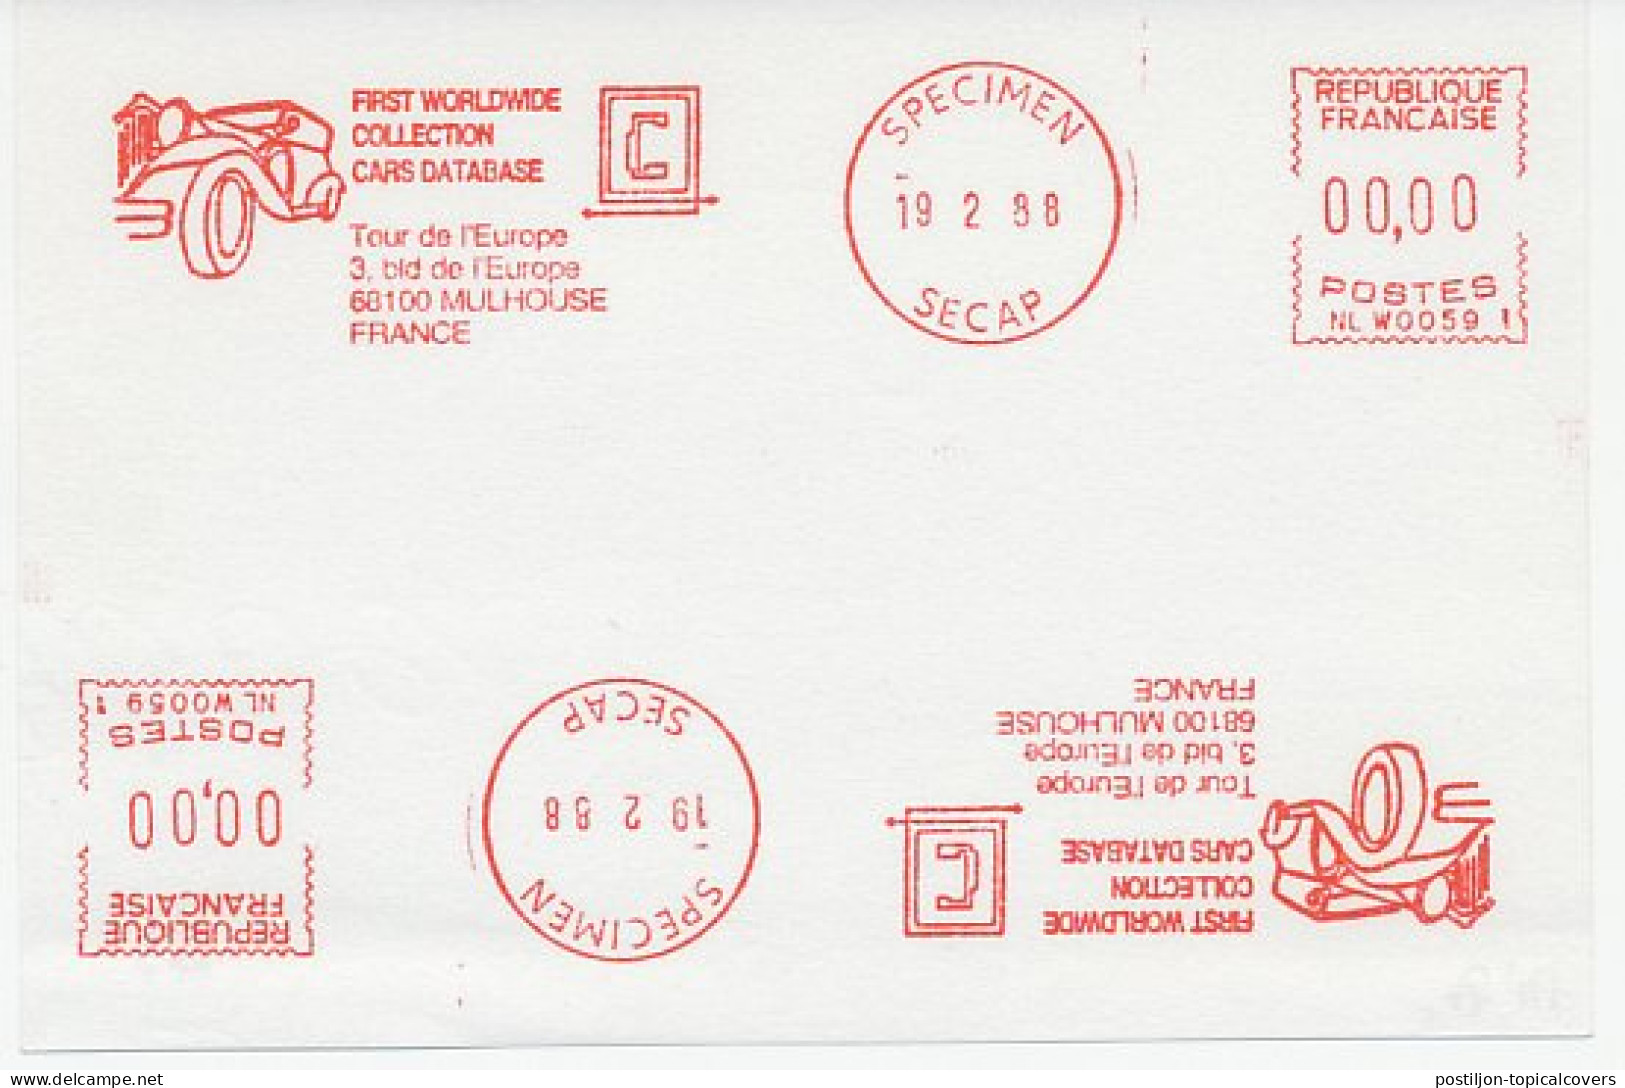 Specimen Meter Sheet France 1988 Worldwide Collection Cars Database - Auto's